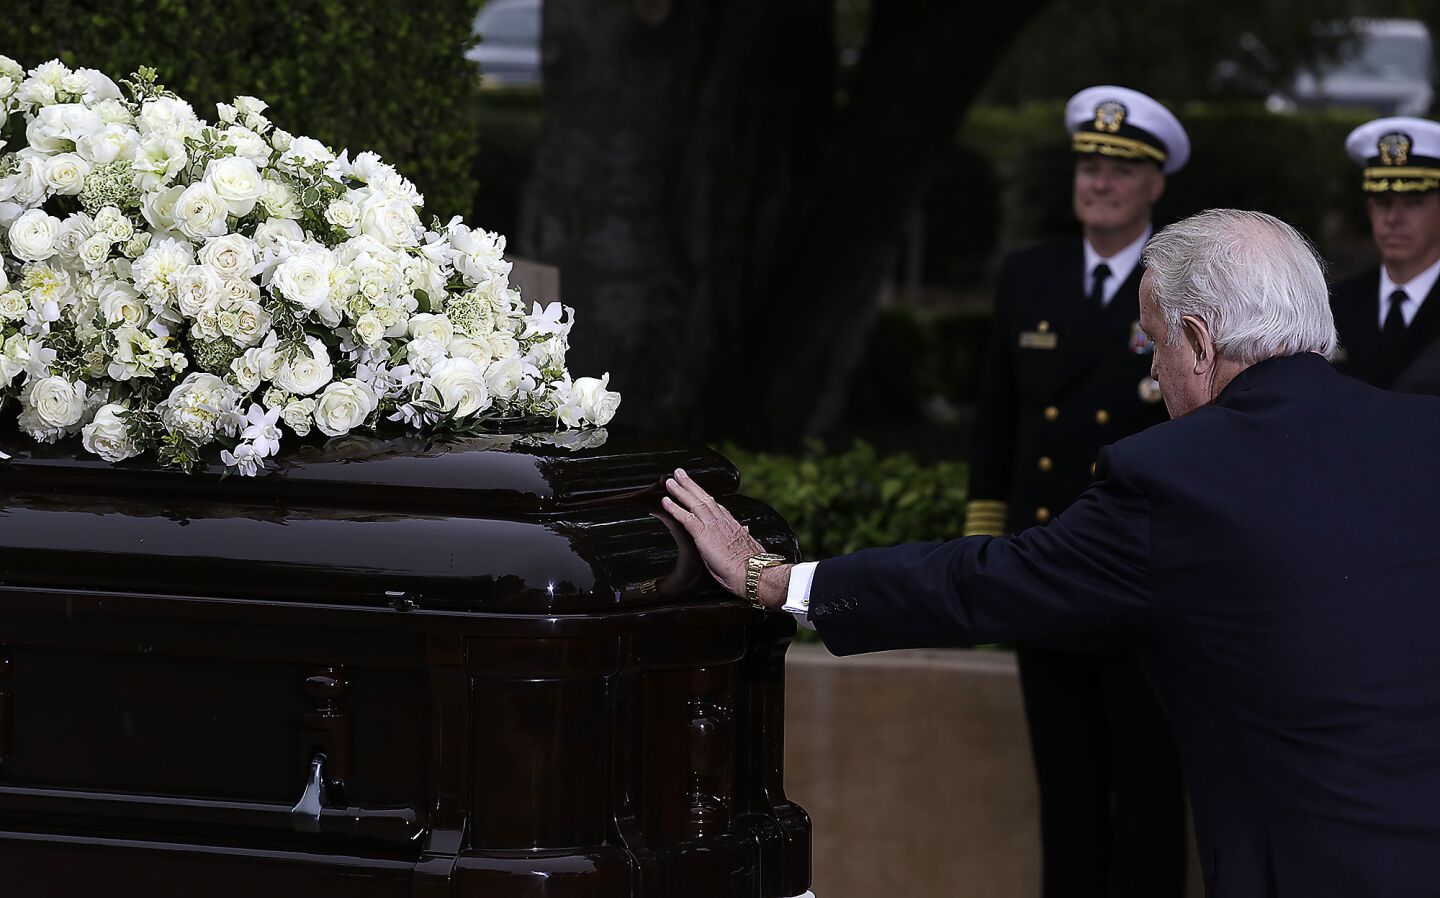 Former Canadian Prime Minister Brian Mulroney pauses at Nancy Reagan's casket at the Ronald Reagan Presidential Library in Simi Valley.